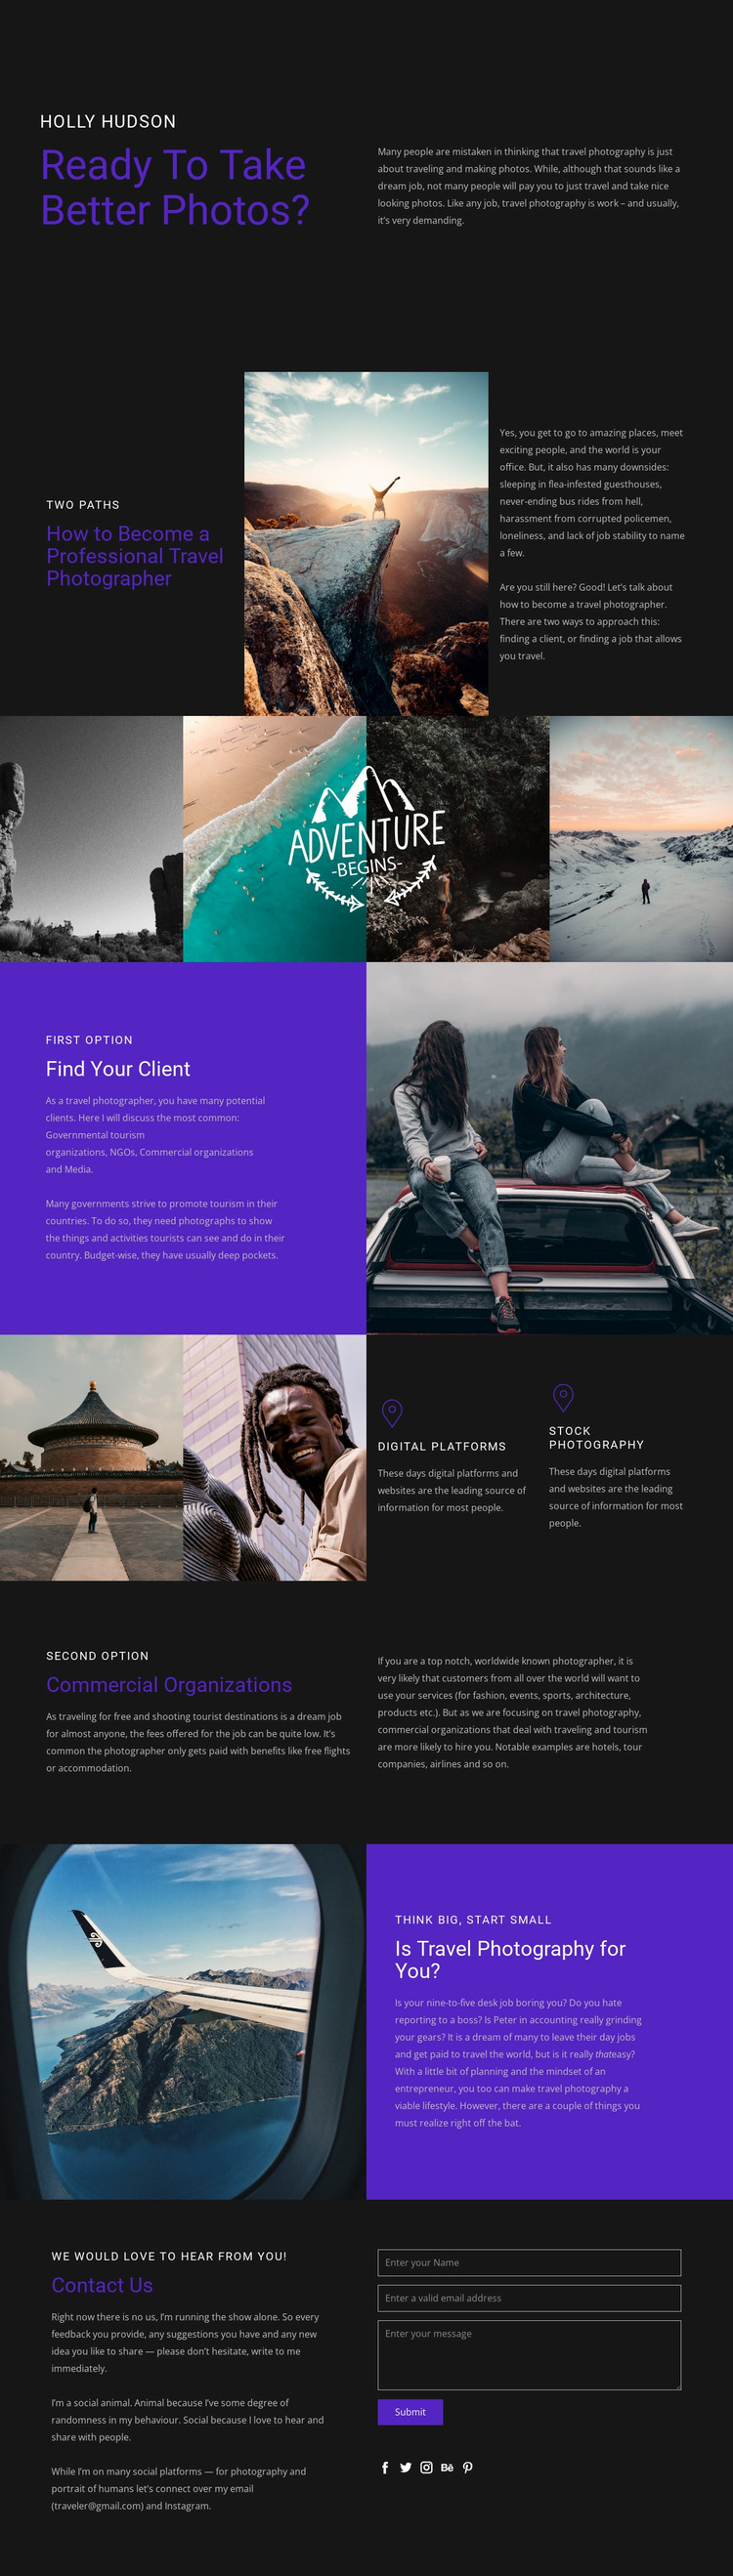 Travel and photography Website Builder Templates